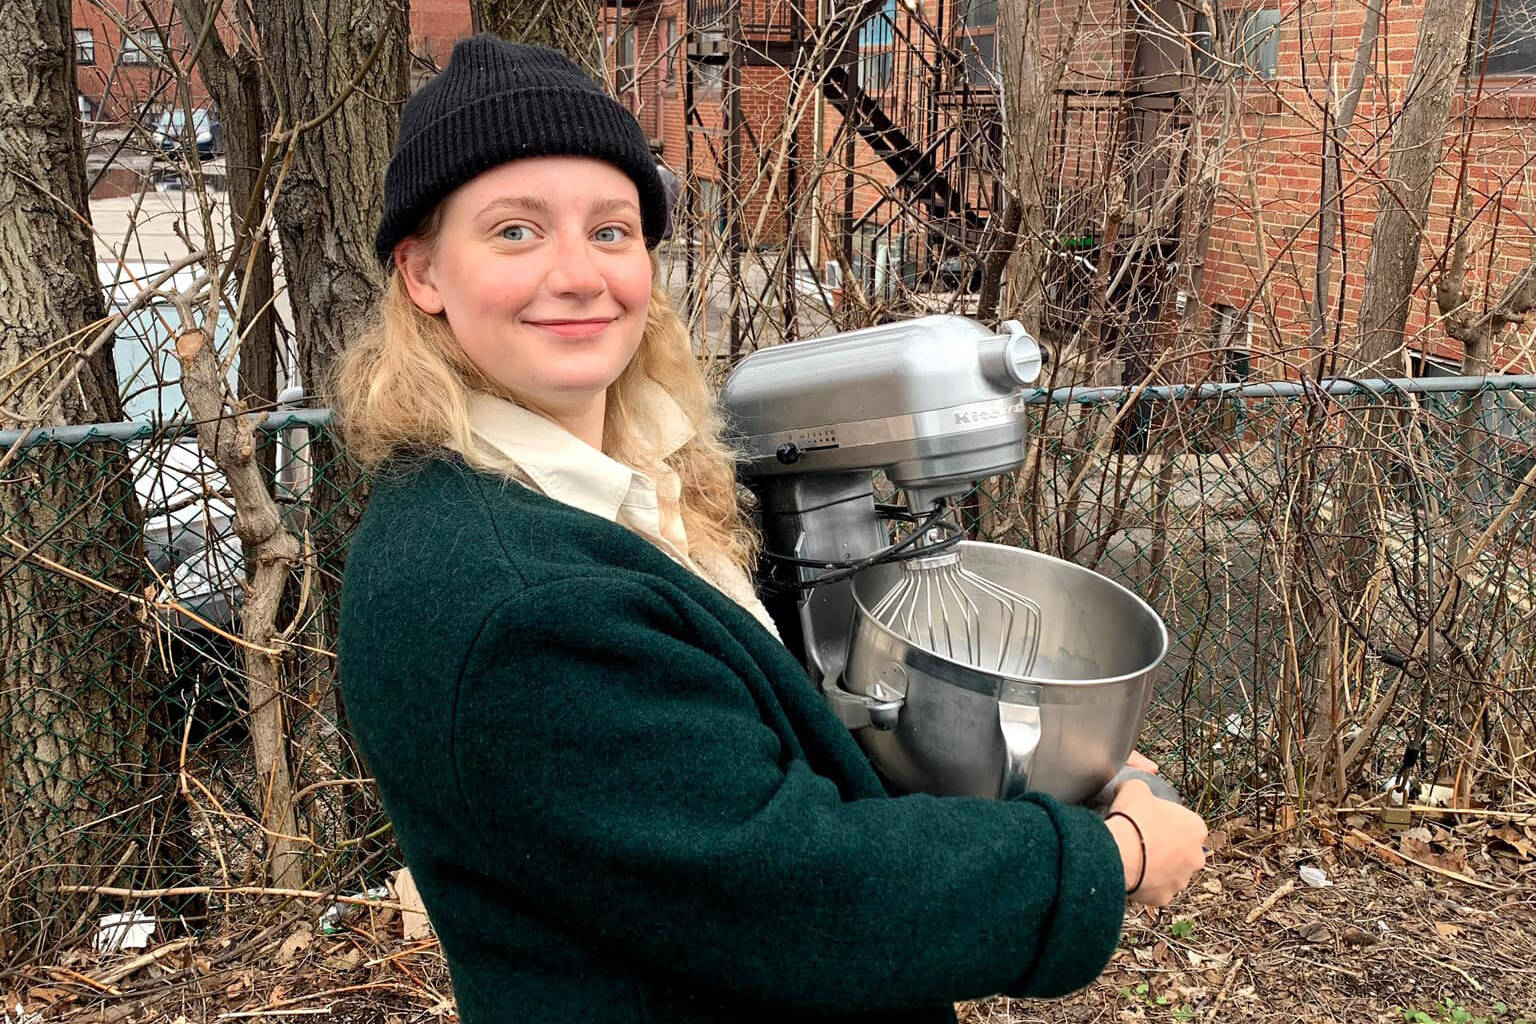 Kaitlyn Hundt-Lippett, pictured with her mixer Stanley. Hundt-Lippet is hoping someone driving to Nelson from Toronto will be able to bring her industrial kitchen mixer along in exchange for free baked goods. (Kaitlyn Alexandria Hundt-Lippett/Facebook)